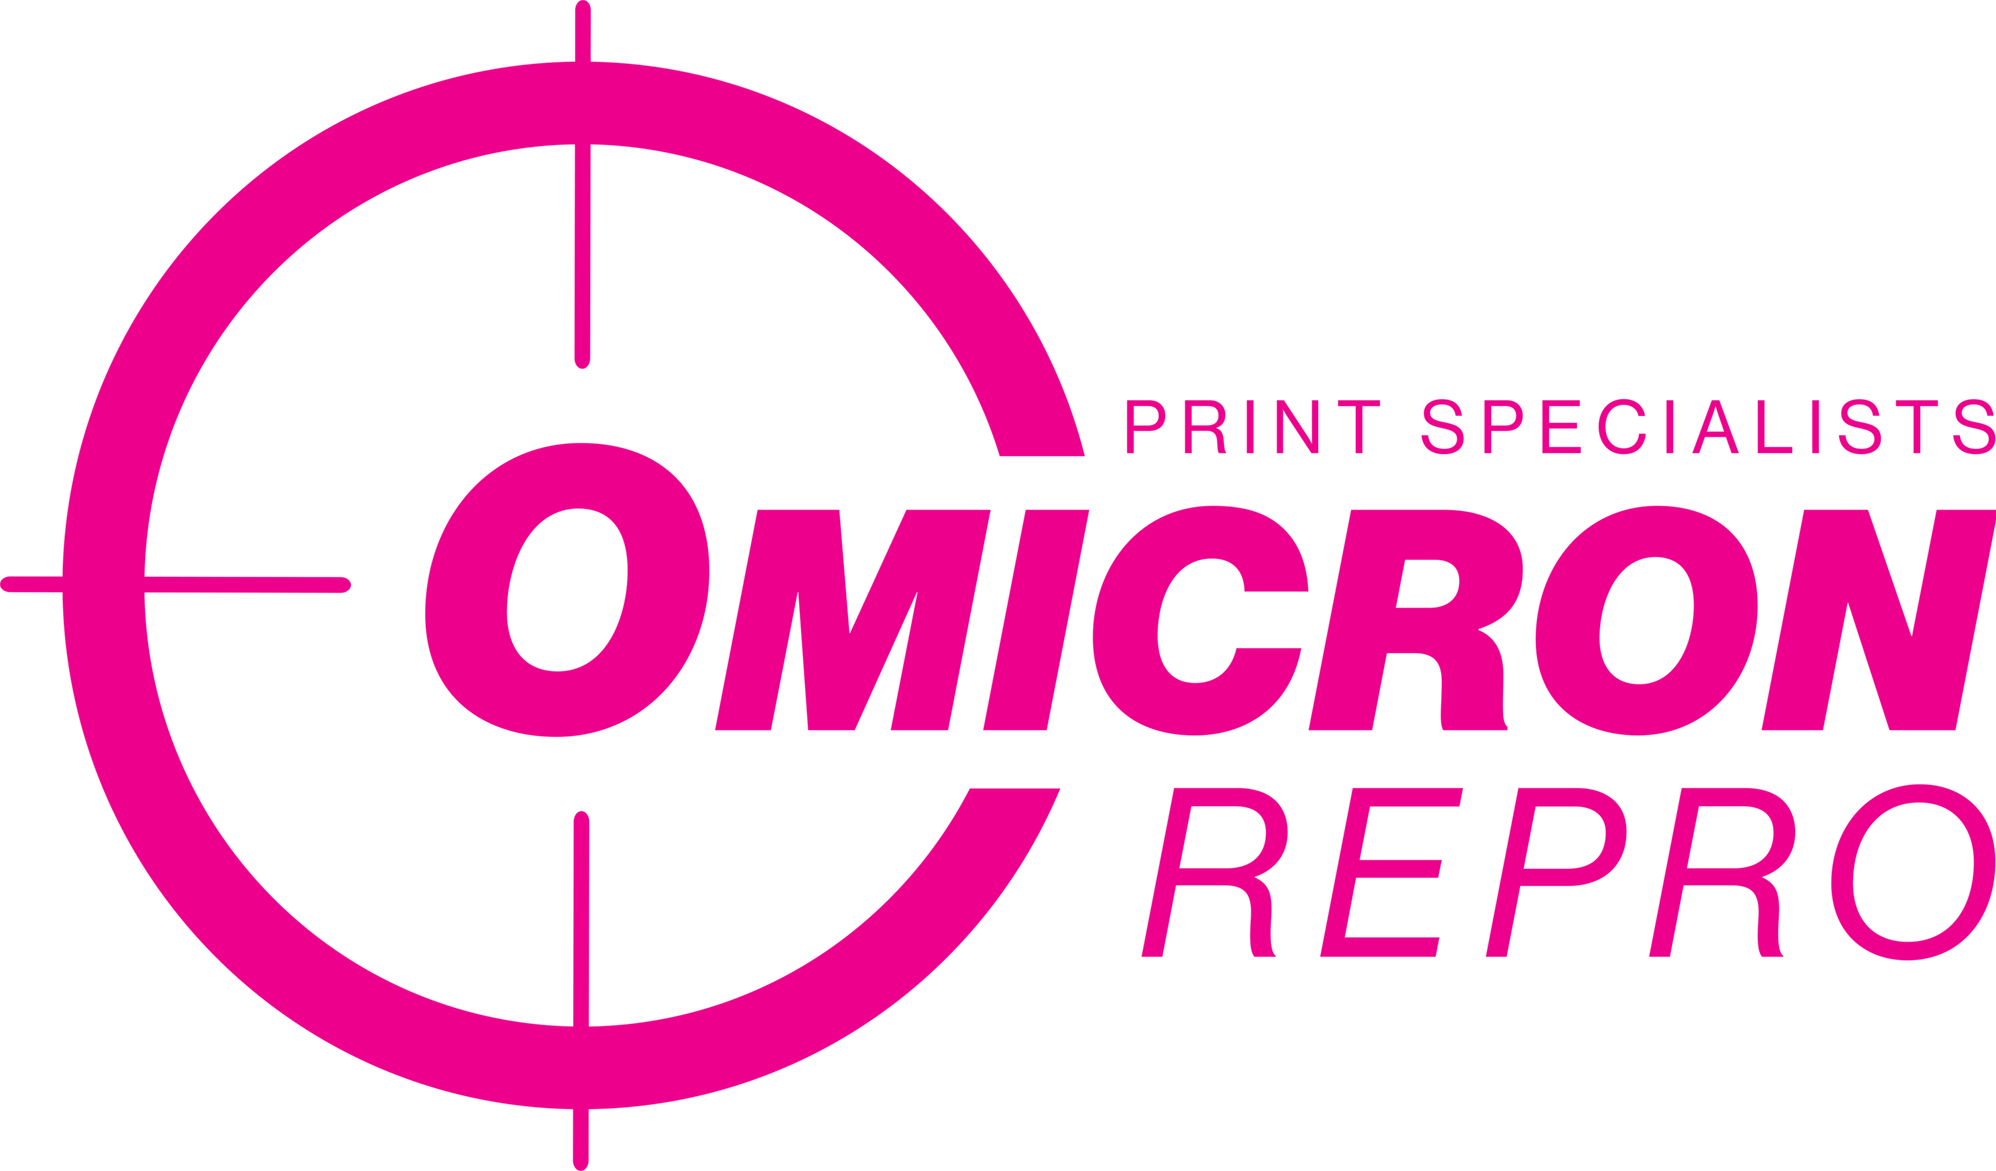 Omicron Repro Print Specialists